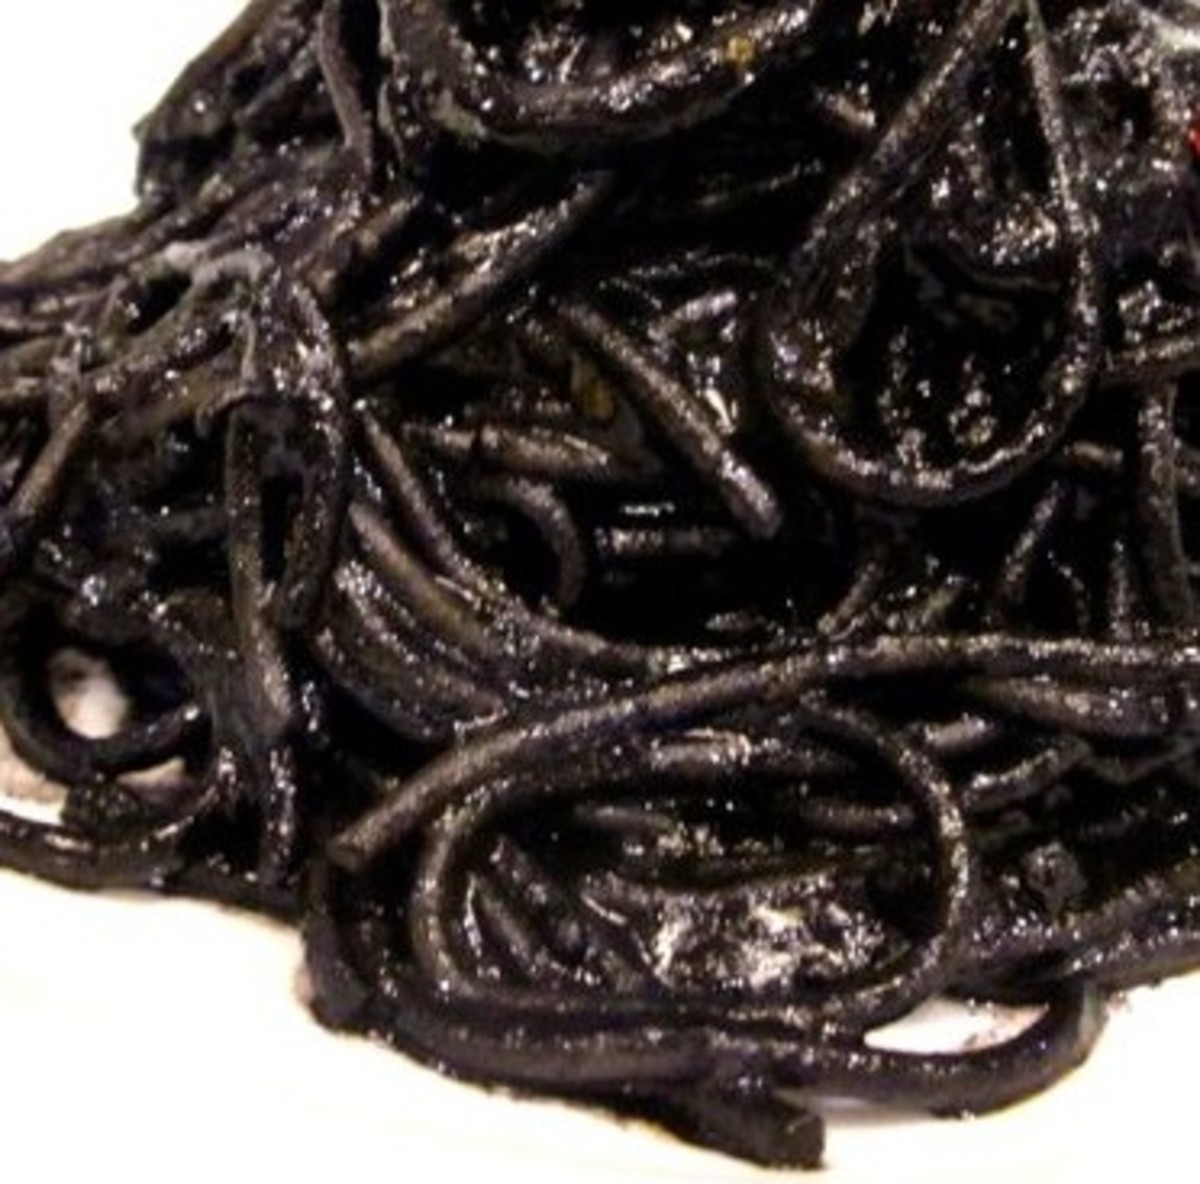 Spaghetti Made With Squid Ink